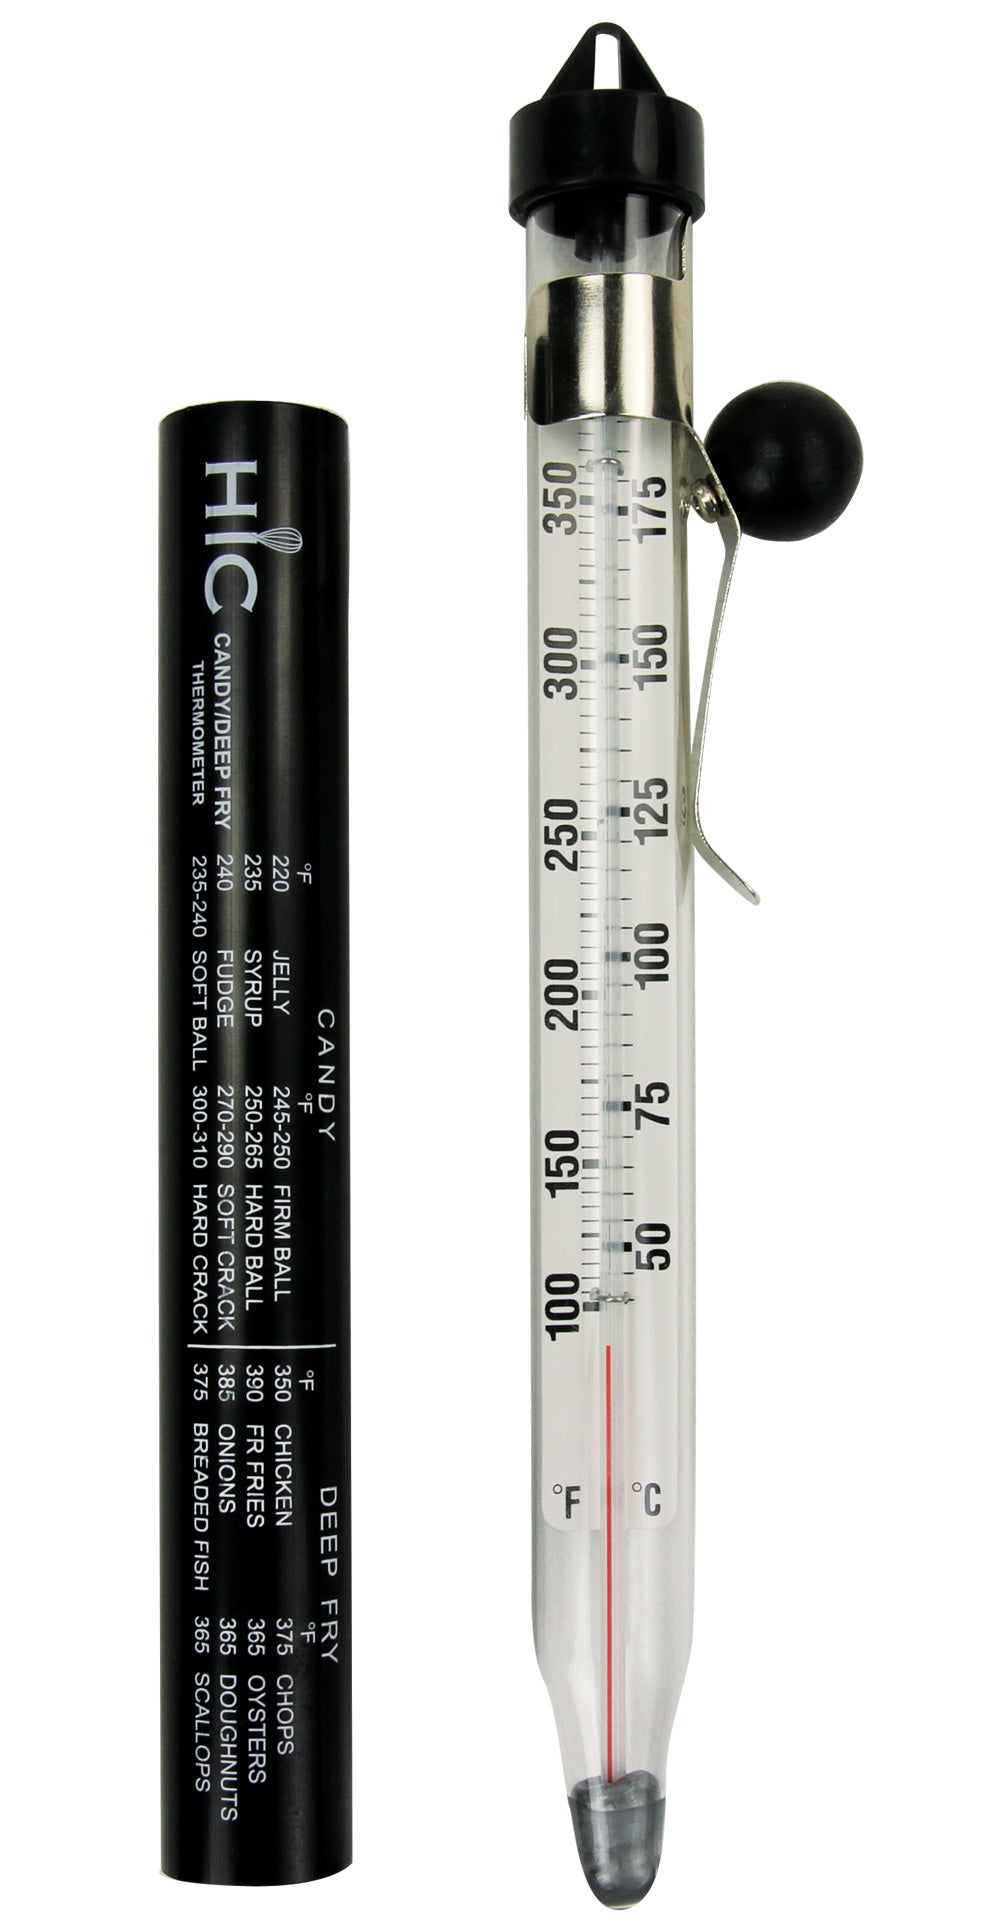 Harold Import 29009 Candy/Deep Fry Thermometer, 8-1/2"